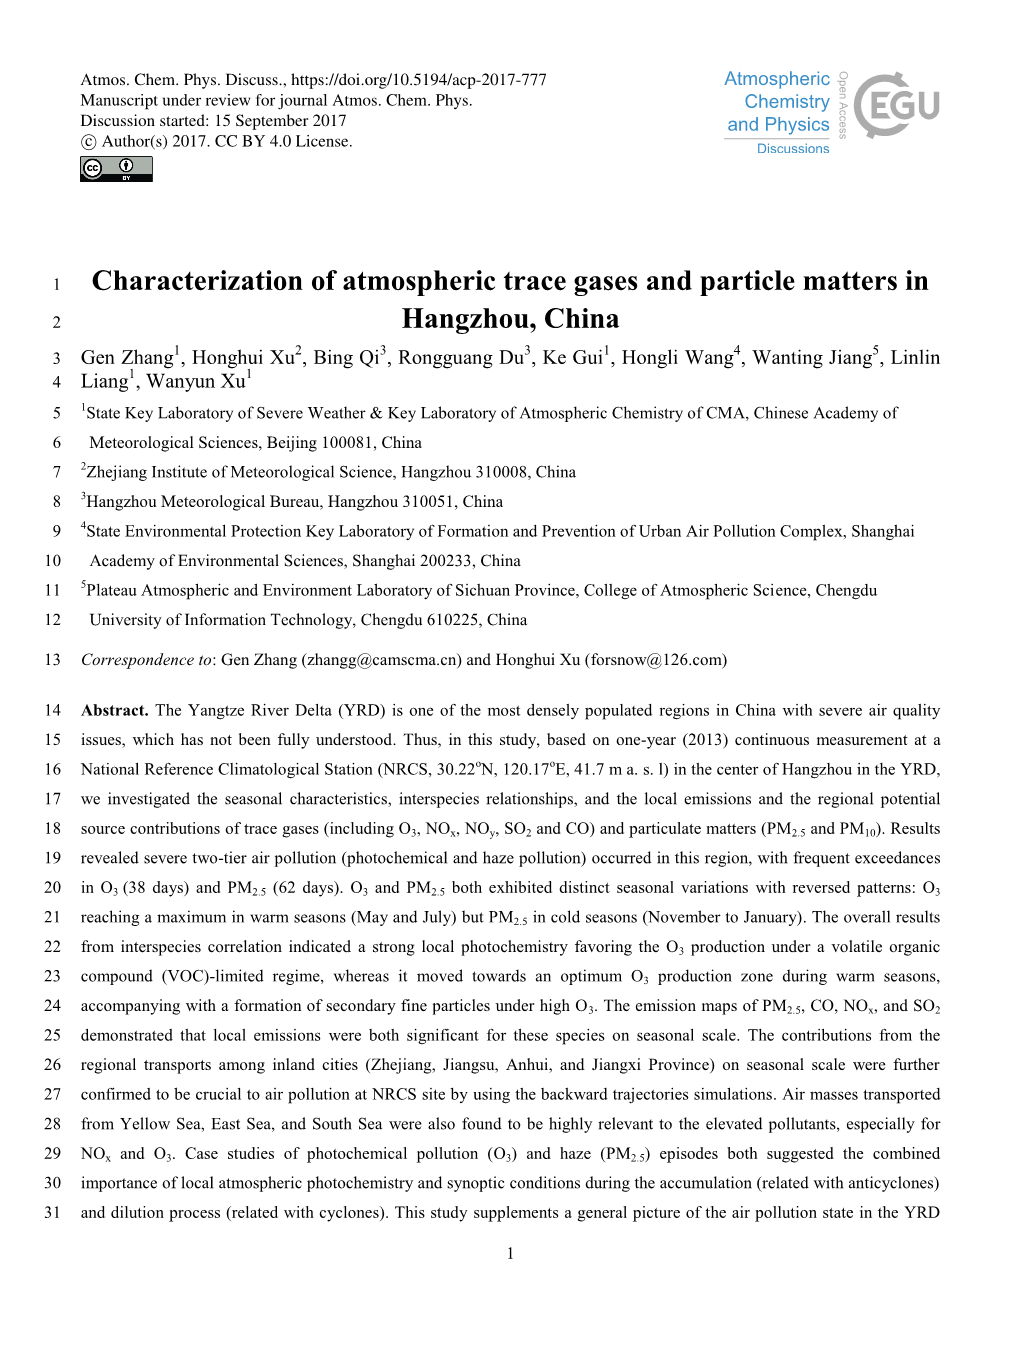 Characterization of Atmospheric Trace Gases and Particle Matters in Hangzhou, China